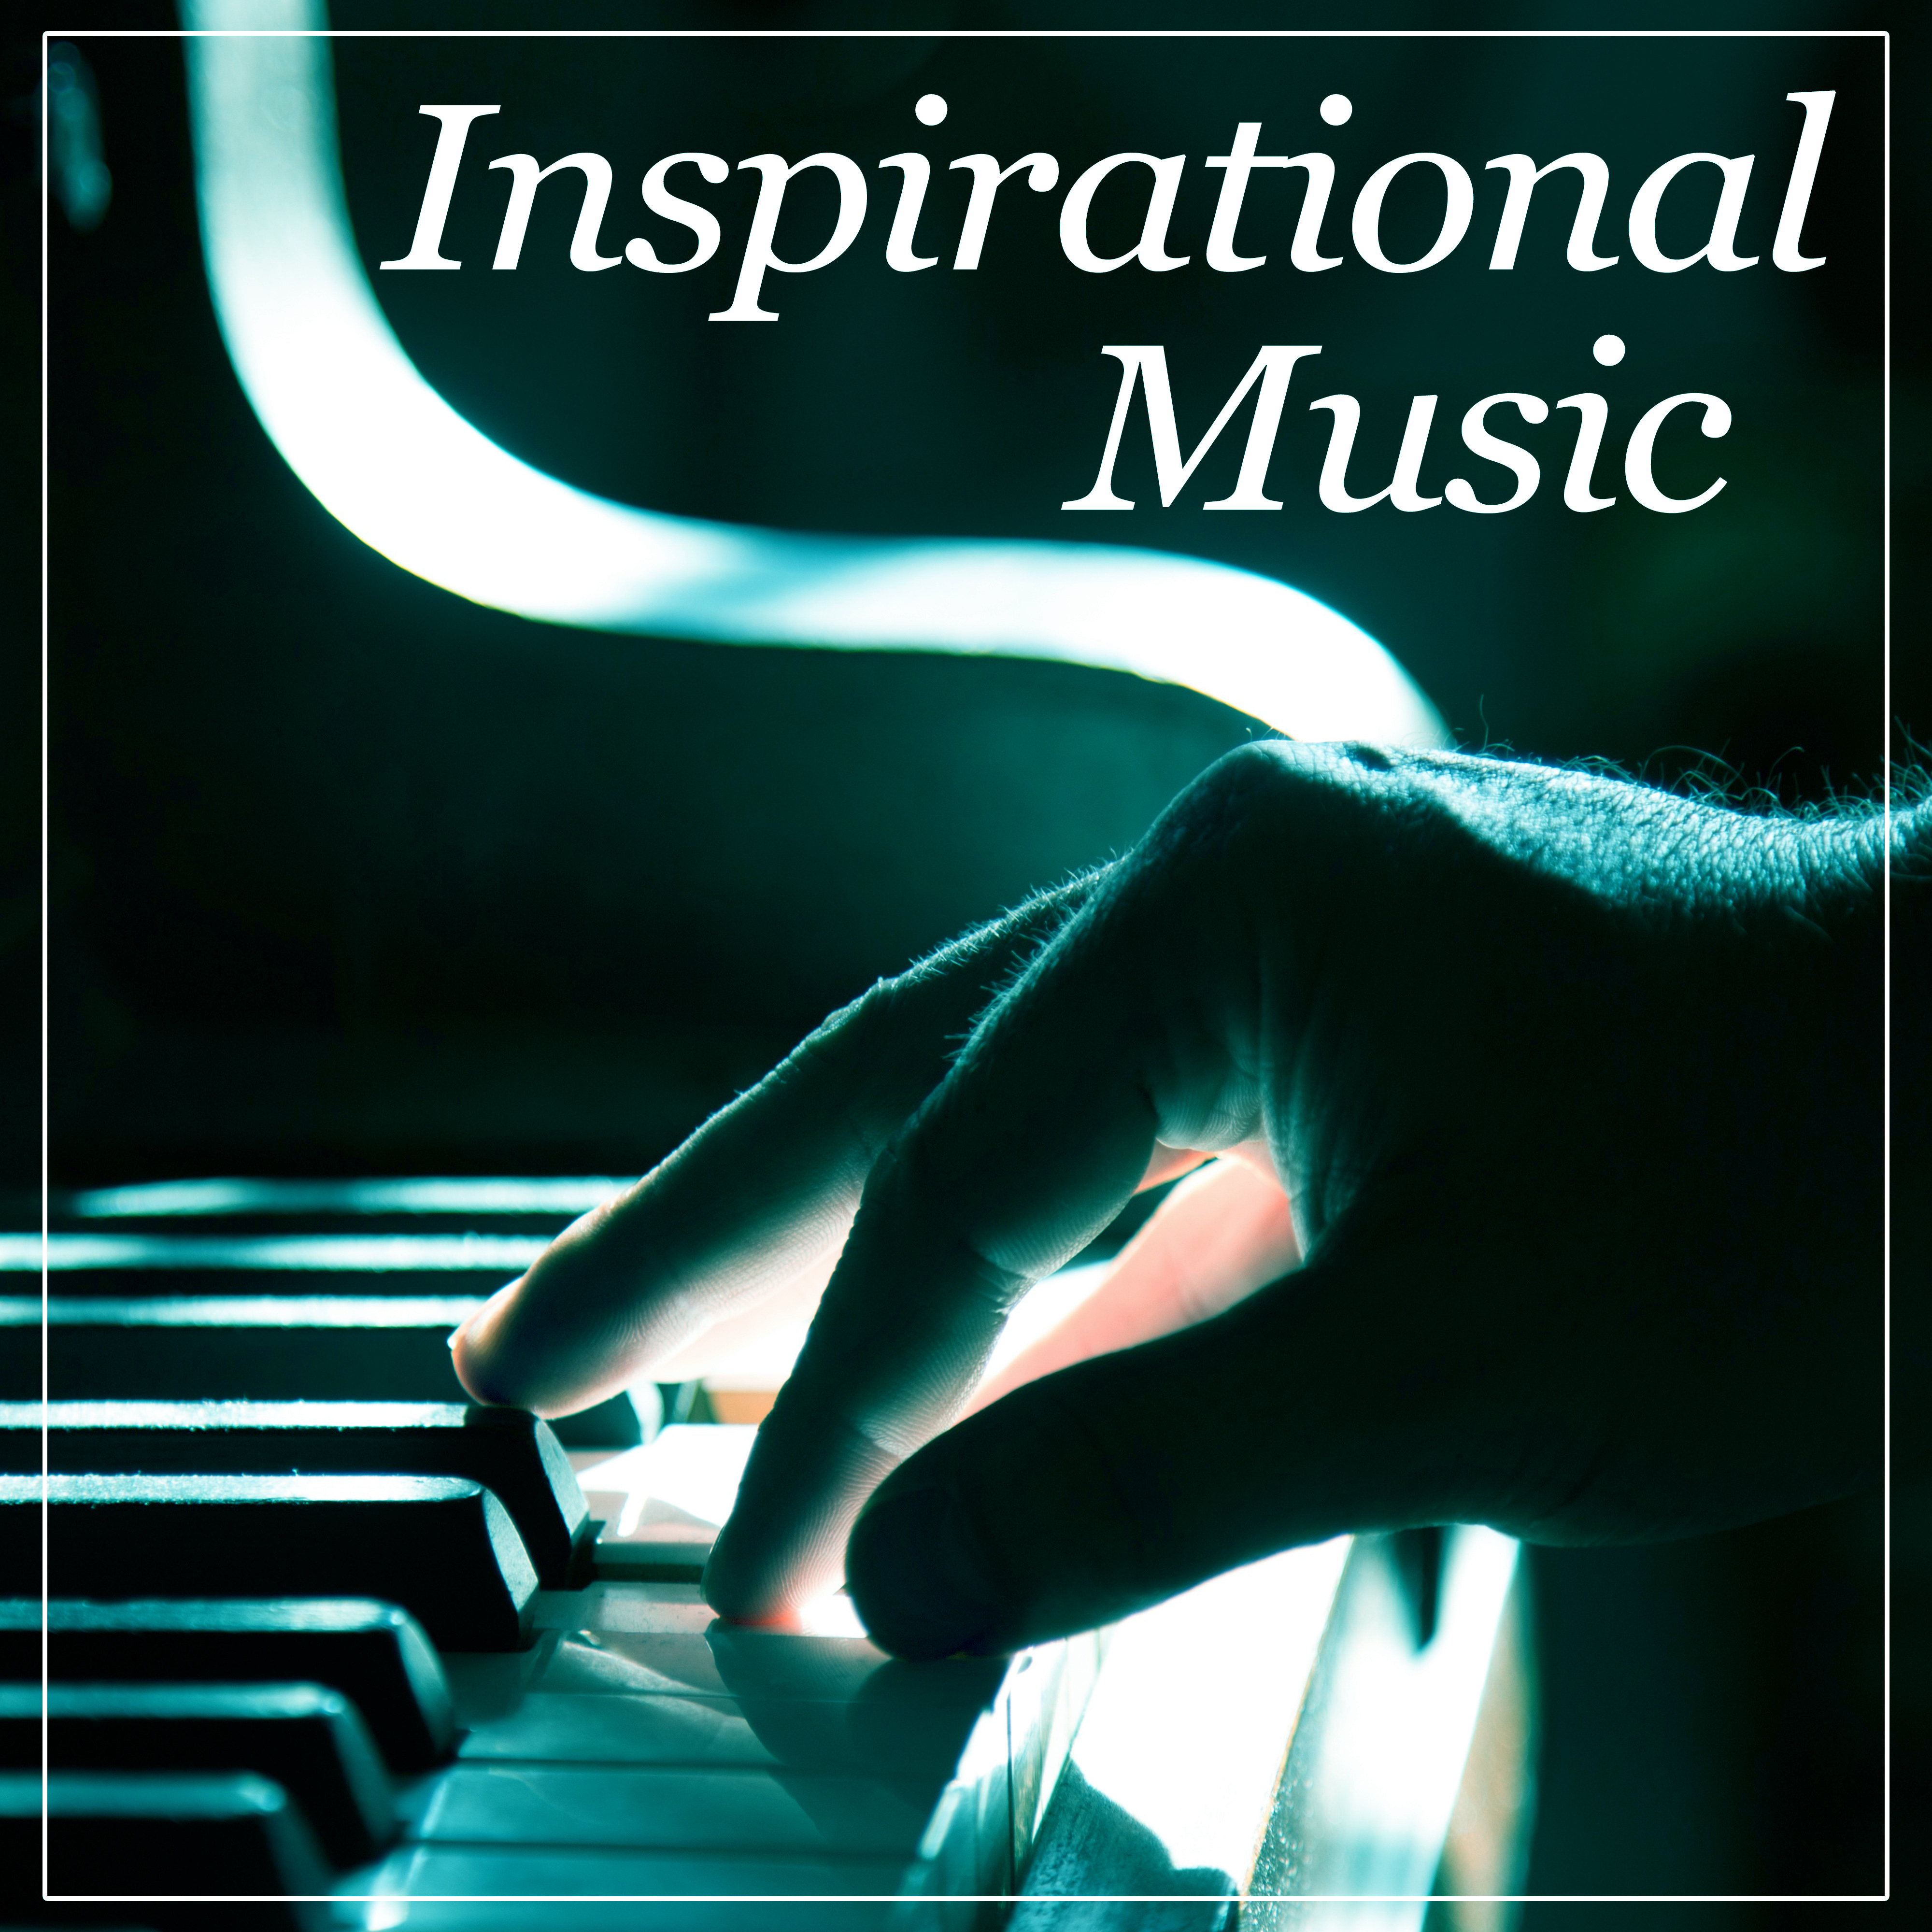 Inspirational Music - Background Music for Bar and Restaurant, Easy Listening, Soft Jazz for You, Close Your Eyes